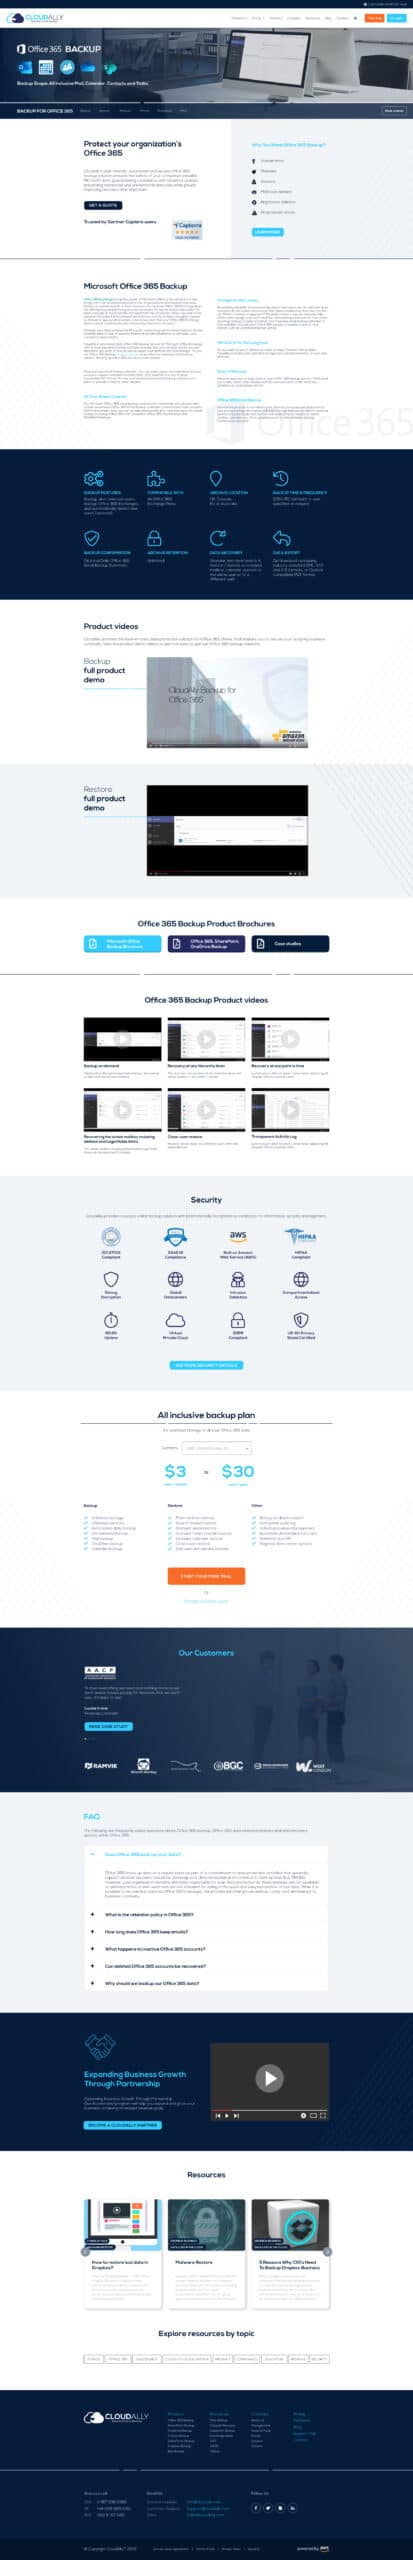 Cloudally_Productpage_v5